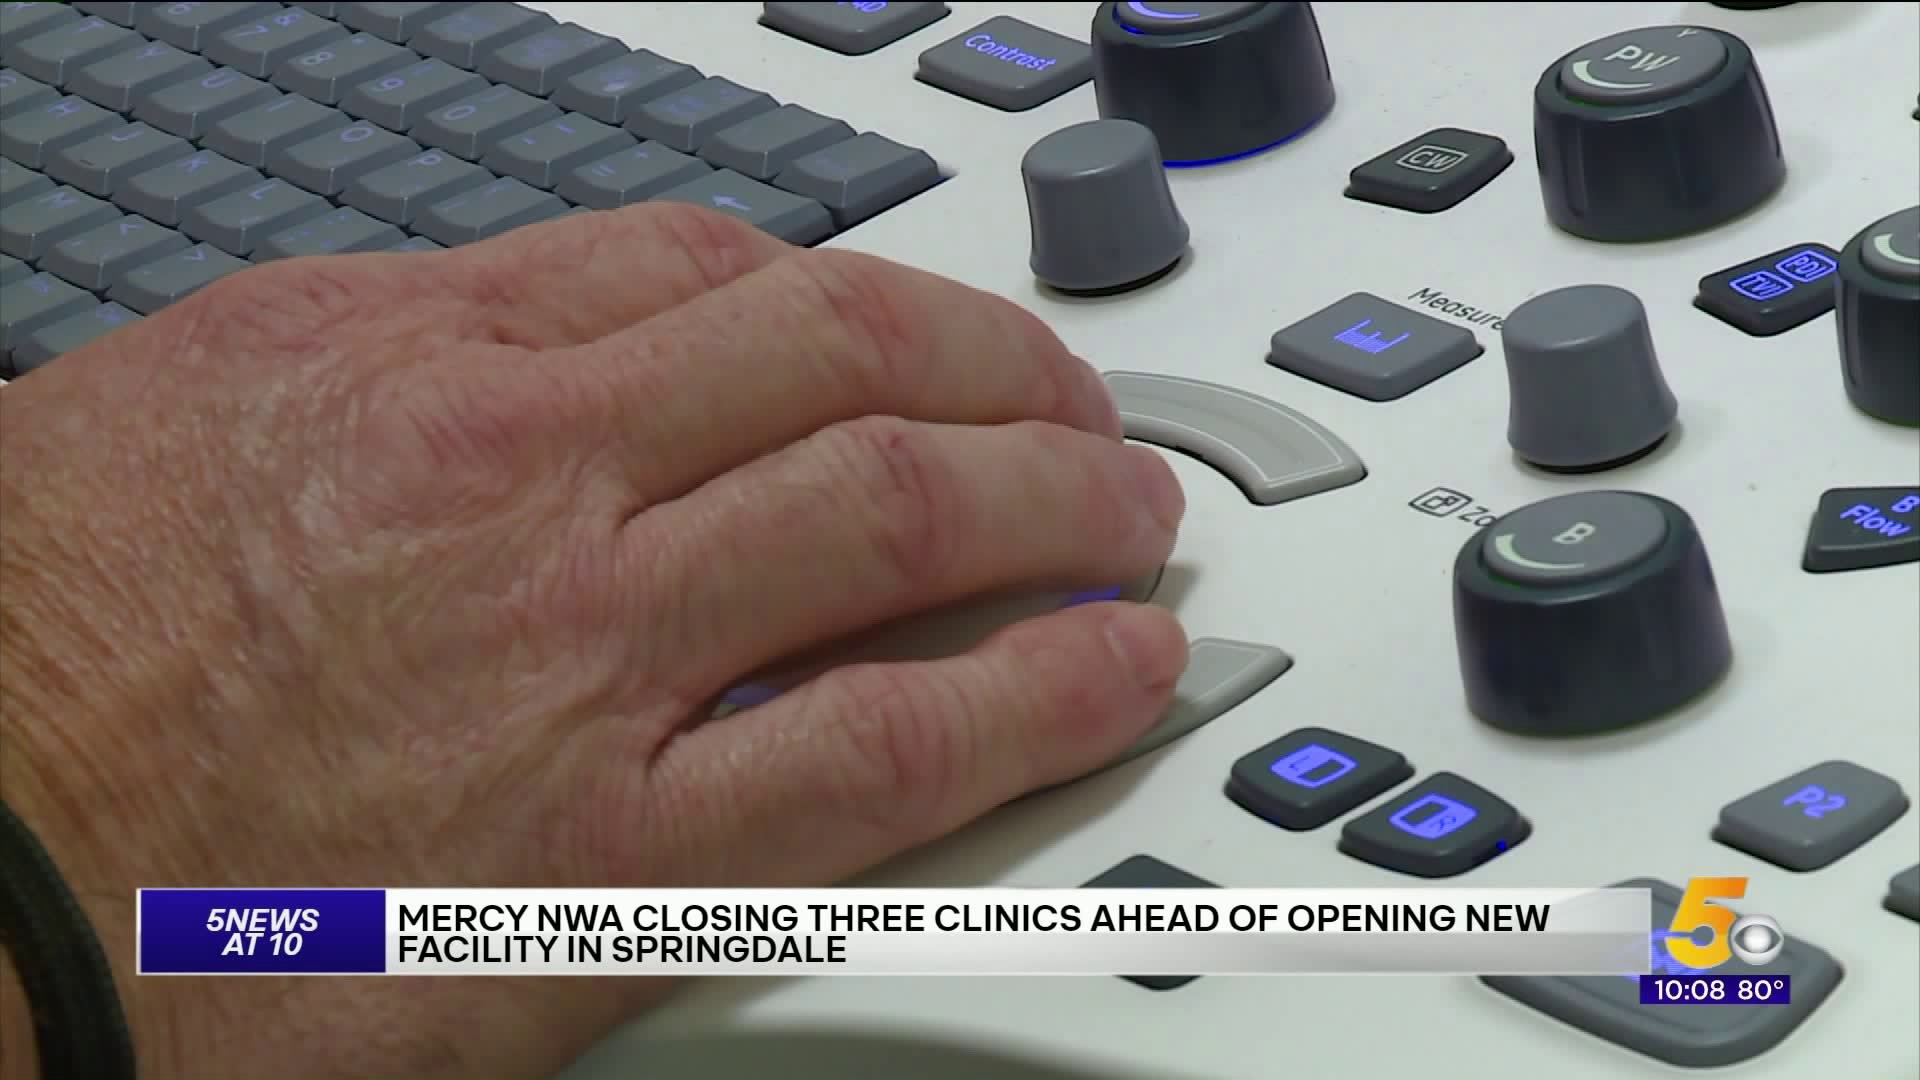 Mercy Northwest Arkansas Closing 3 Clinics Ahead Of Opening New Facility In Springdale